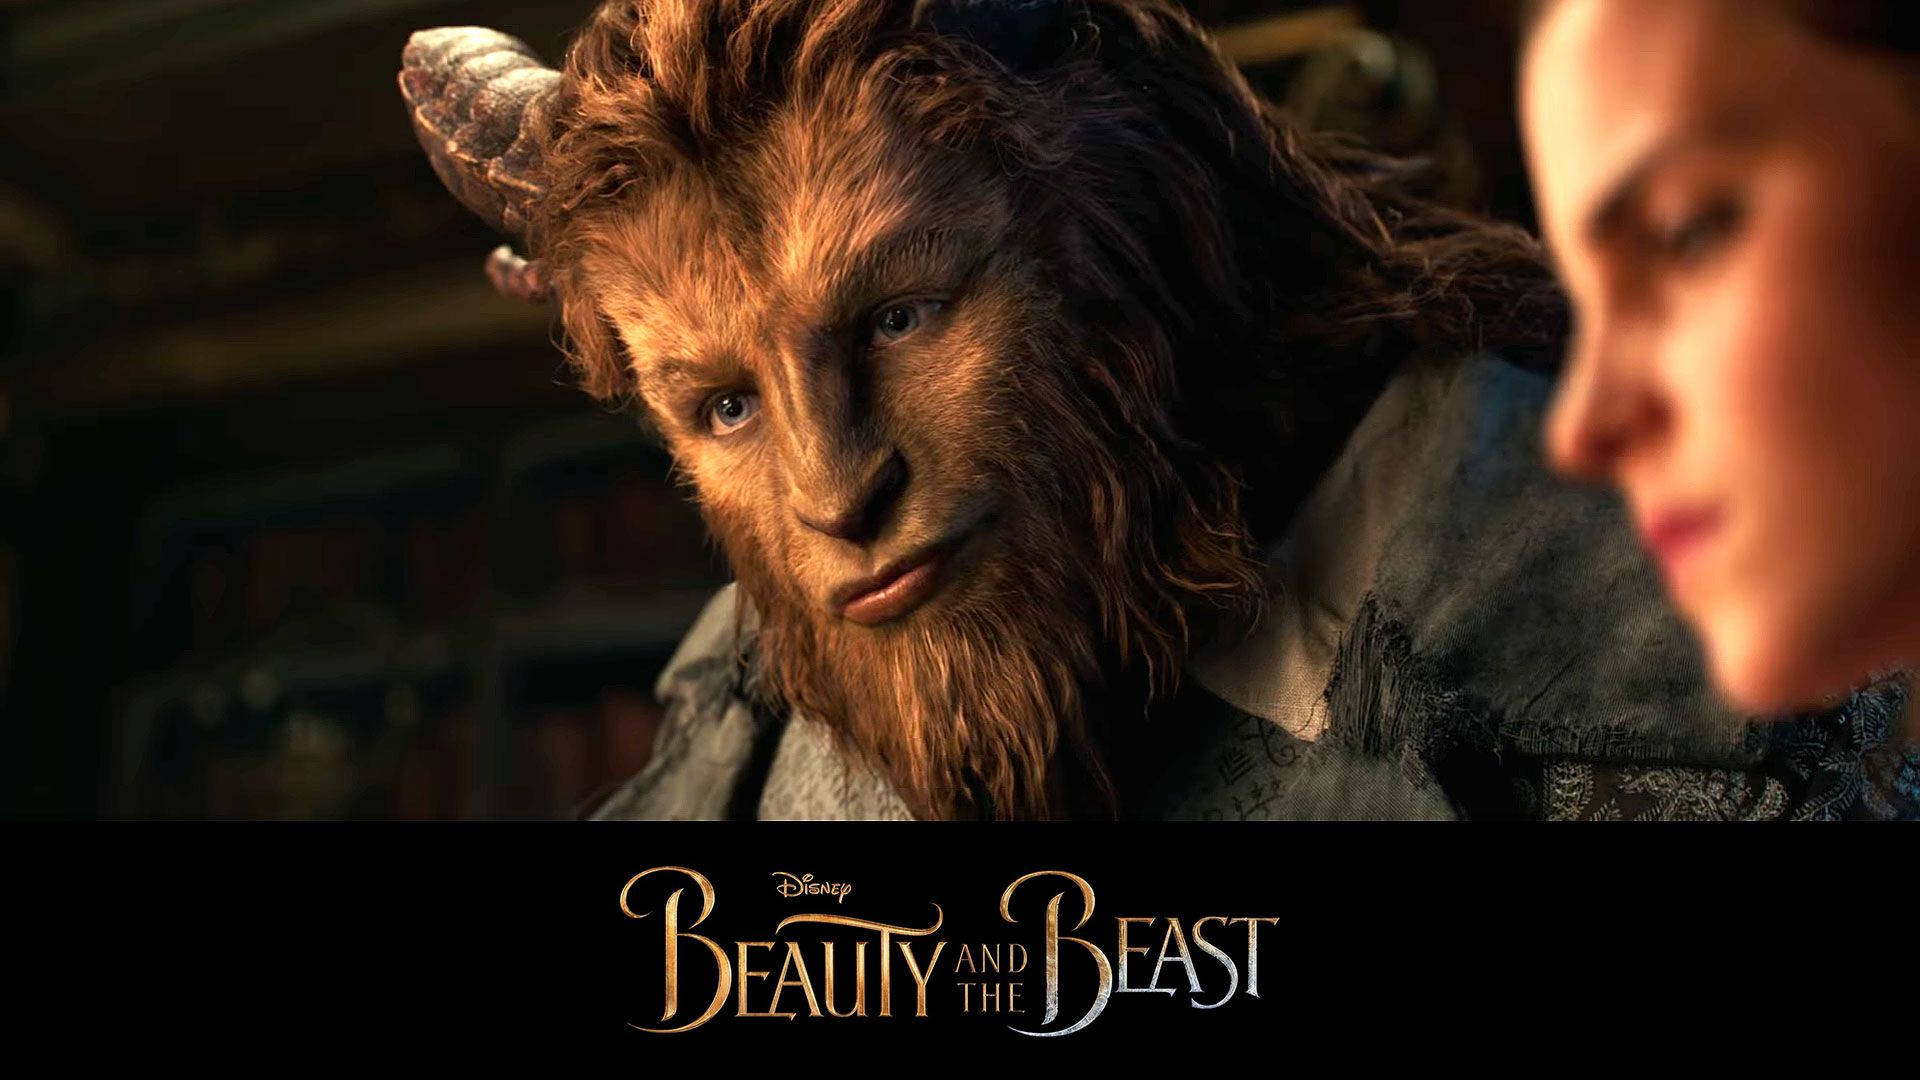 Beauty and the Beast 2017 Movie Wallpaper